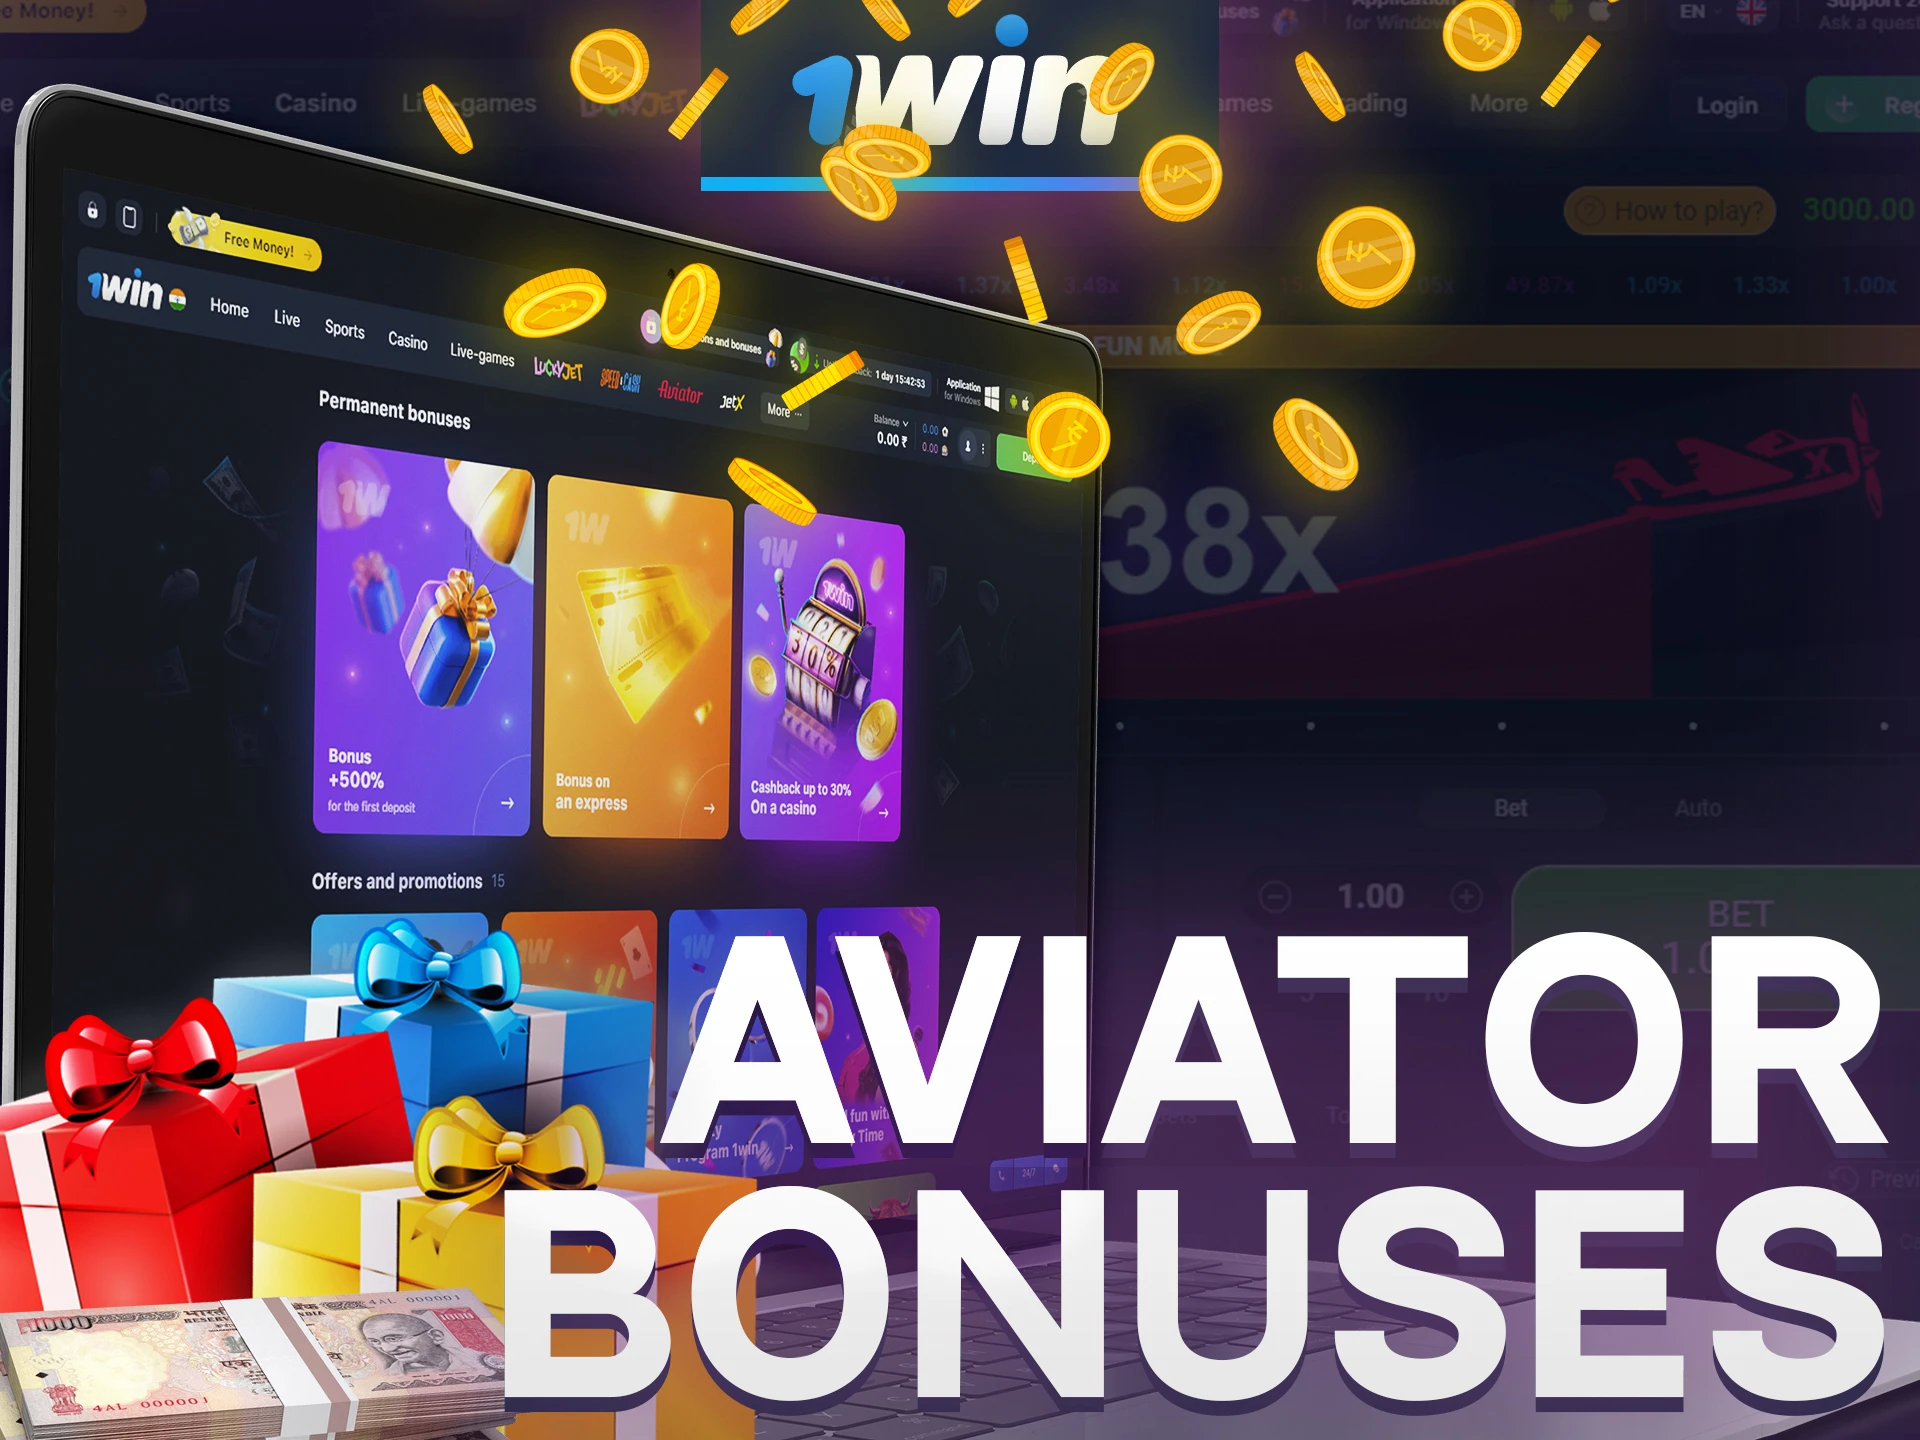 Get bonuses from 1win to increase your profit from playing Aviator.